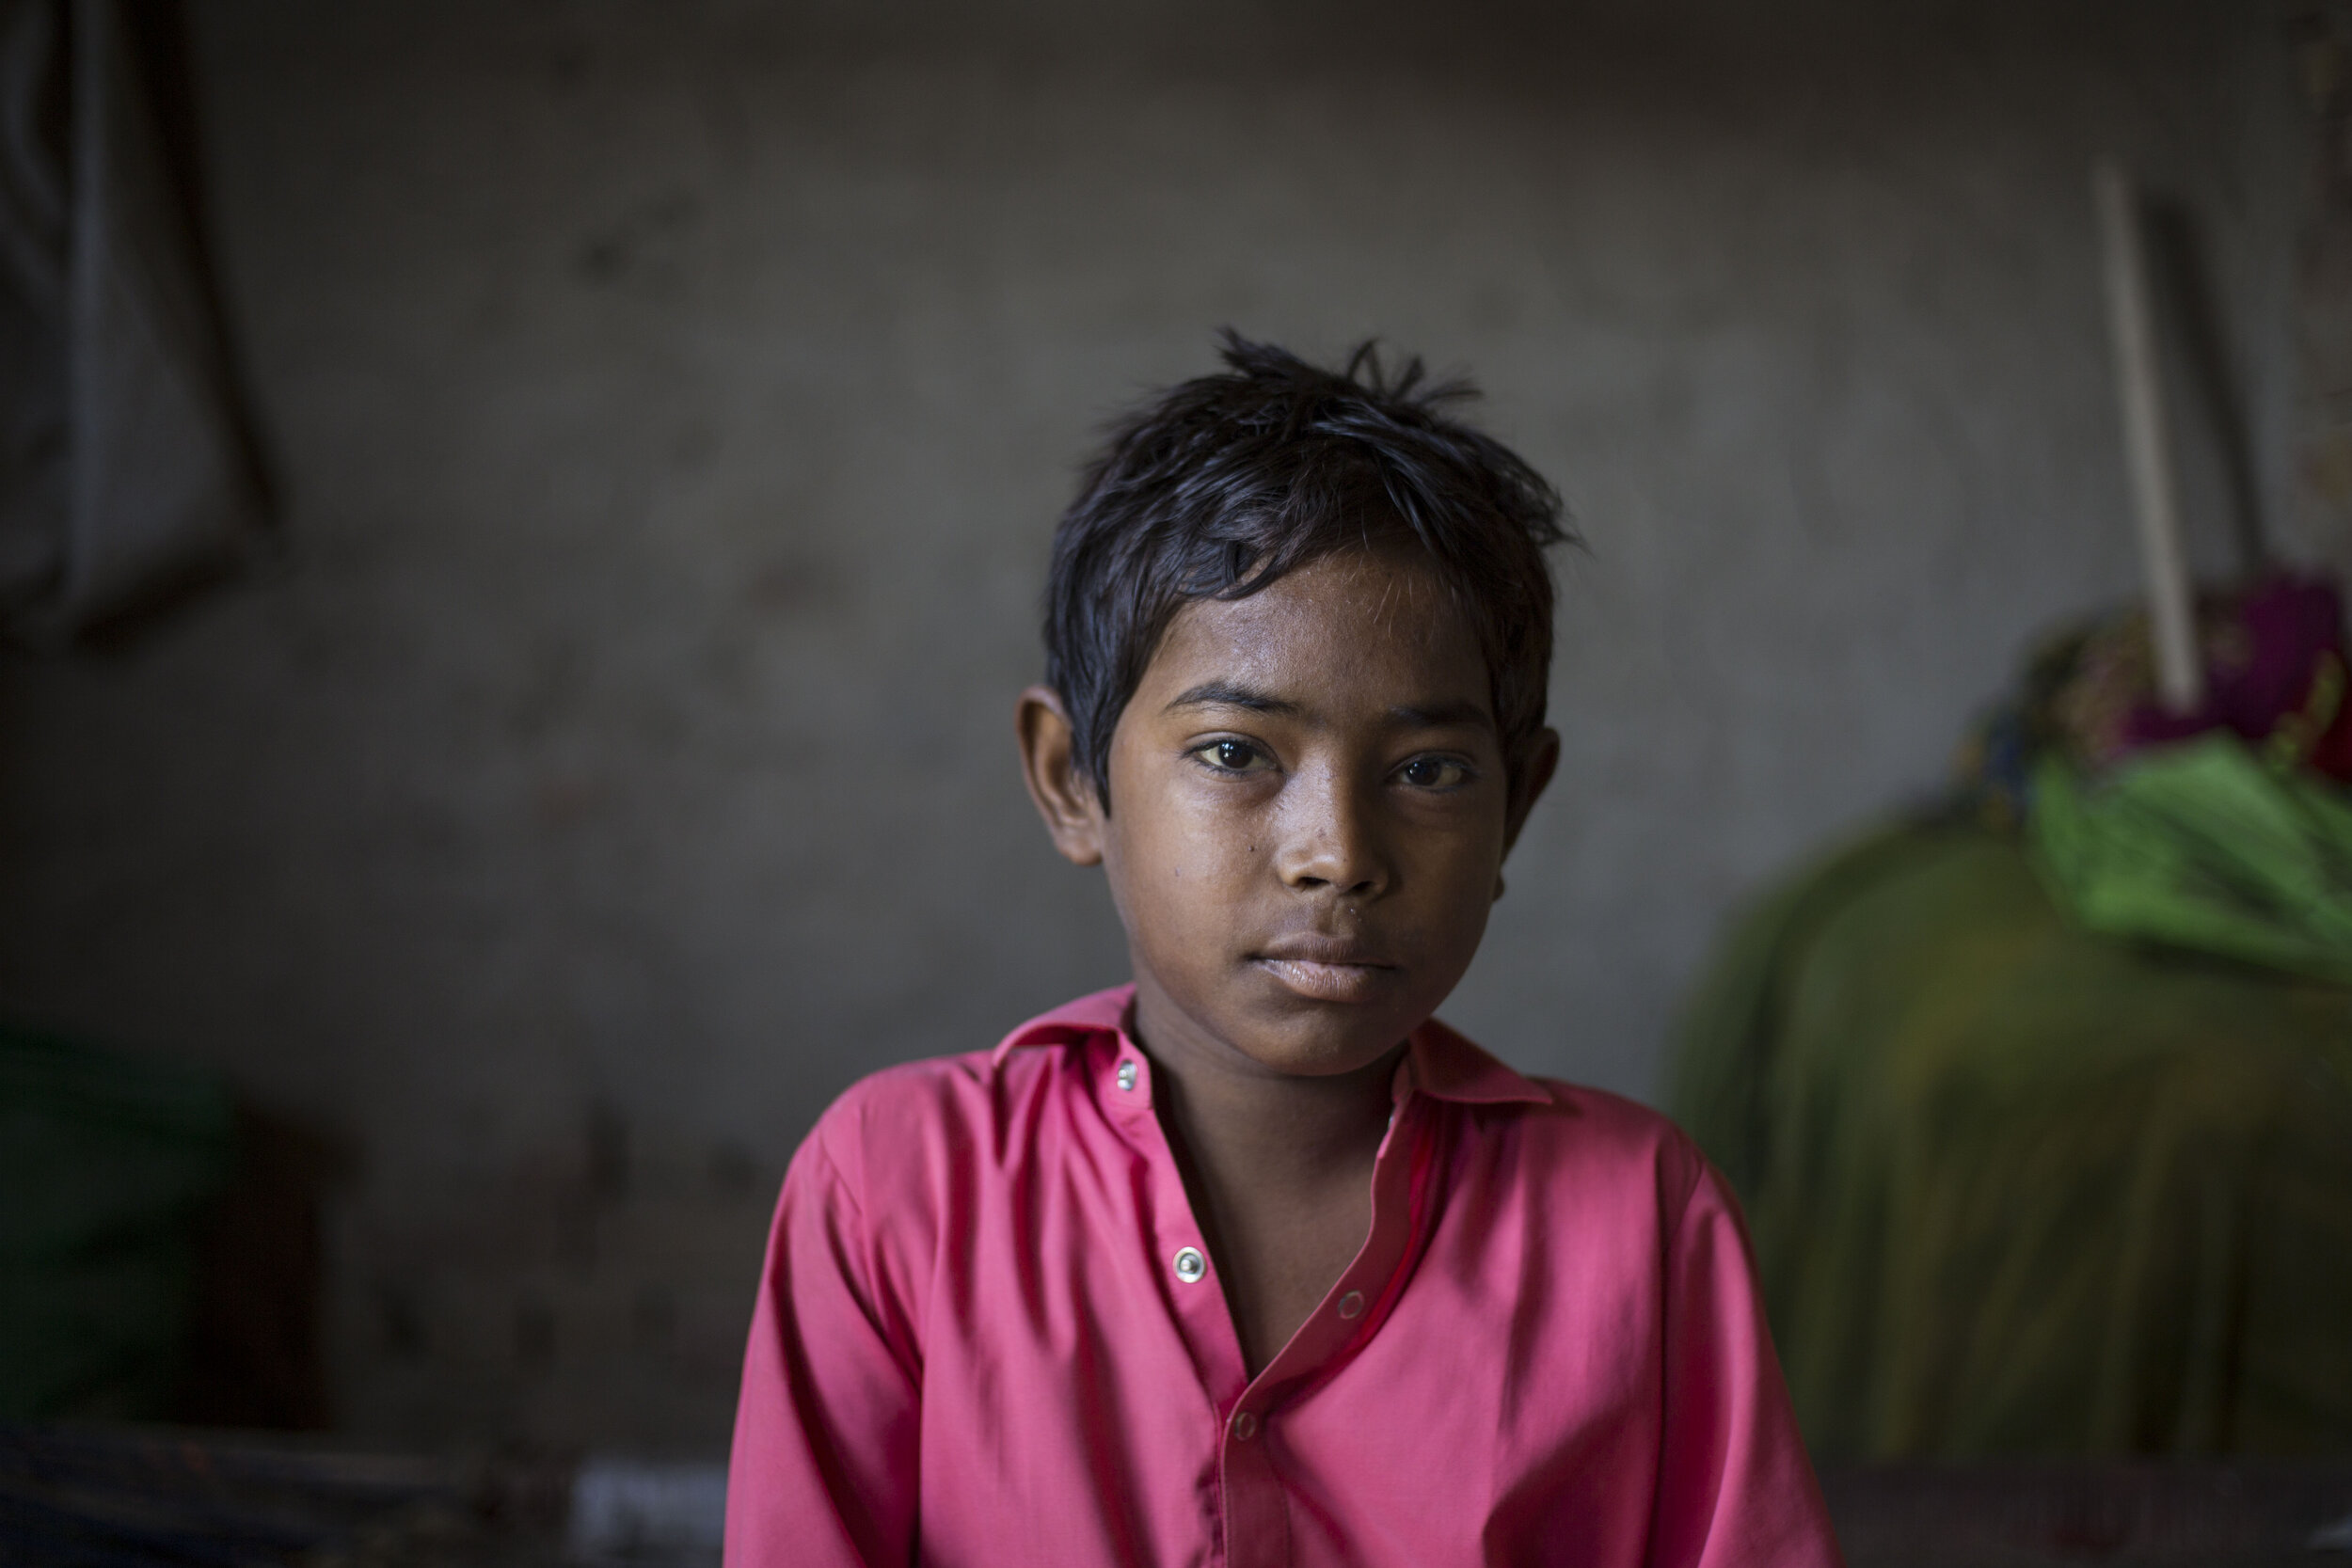  11-year-old Mohsin Ali who has been diagnosed with HIV along with 11 of his family members on July 24, 2019 in village Allah Dino, Sind, Pakistan. 